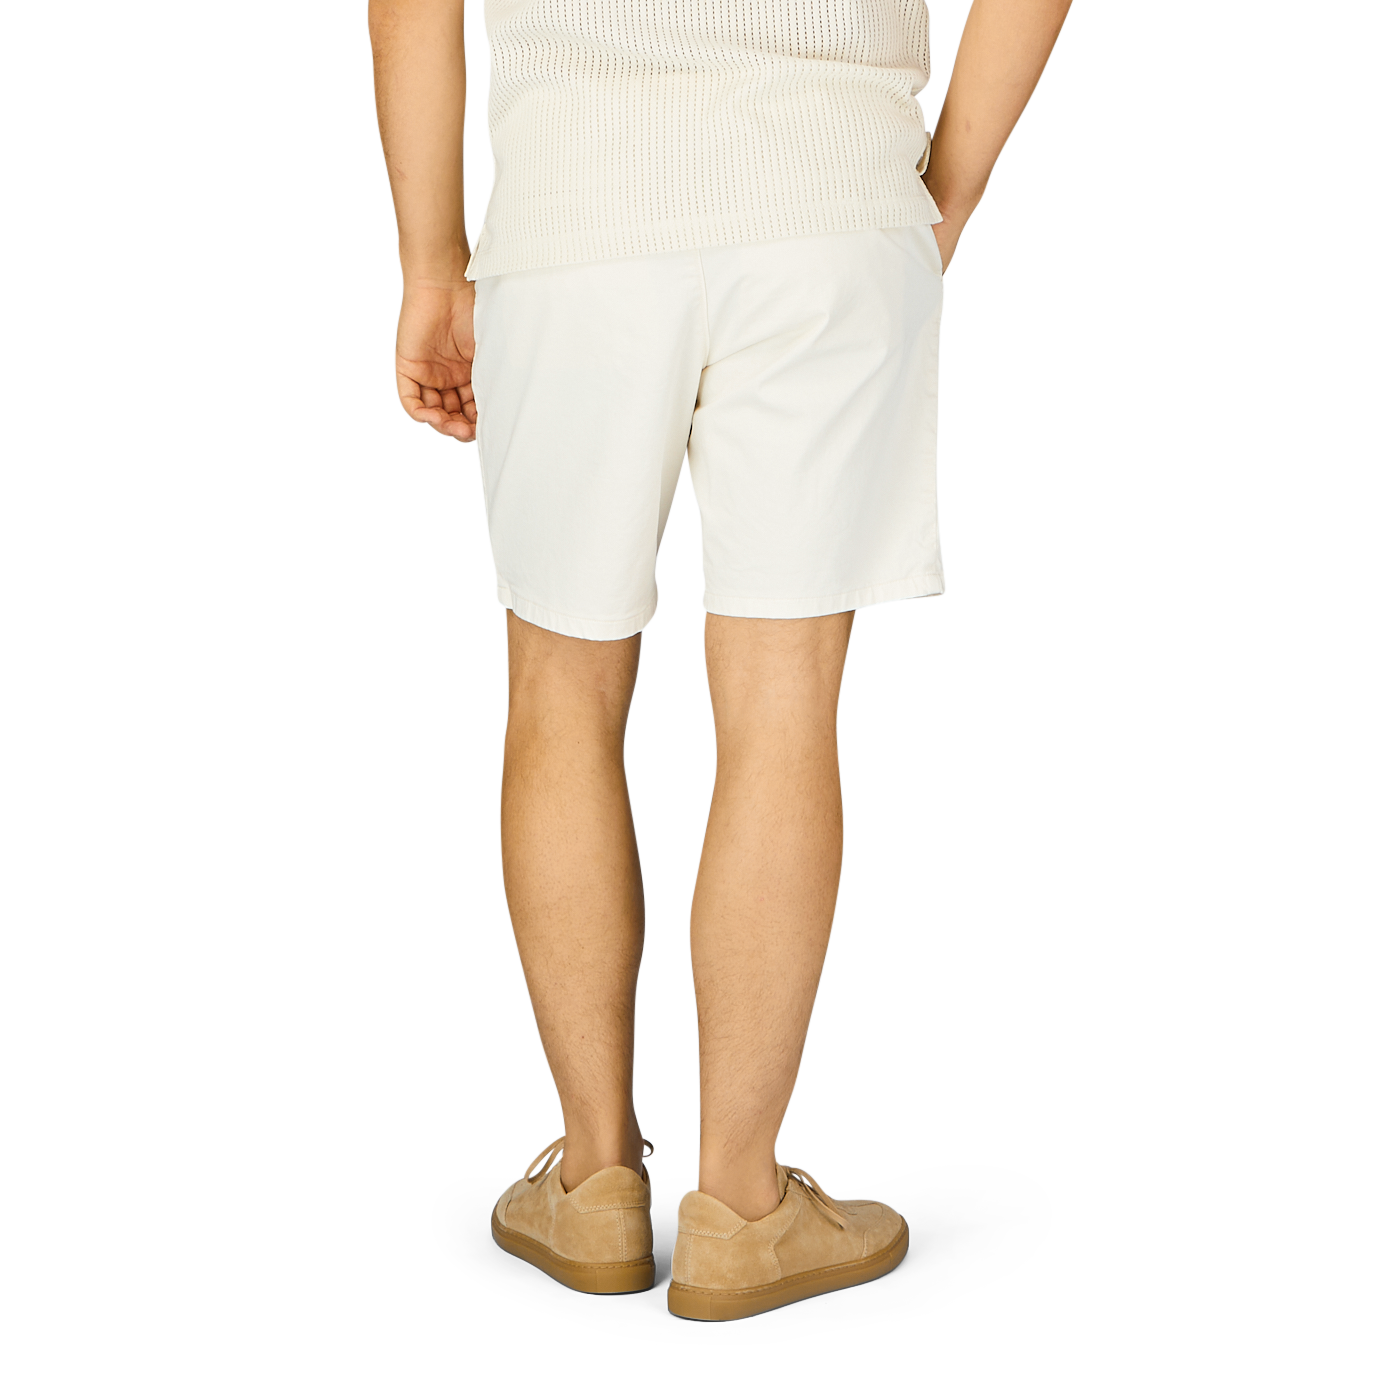 The back view of a man wearing Ecru Cotton Blend Philips Shorts by Paige and a tan shirt.